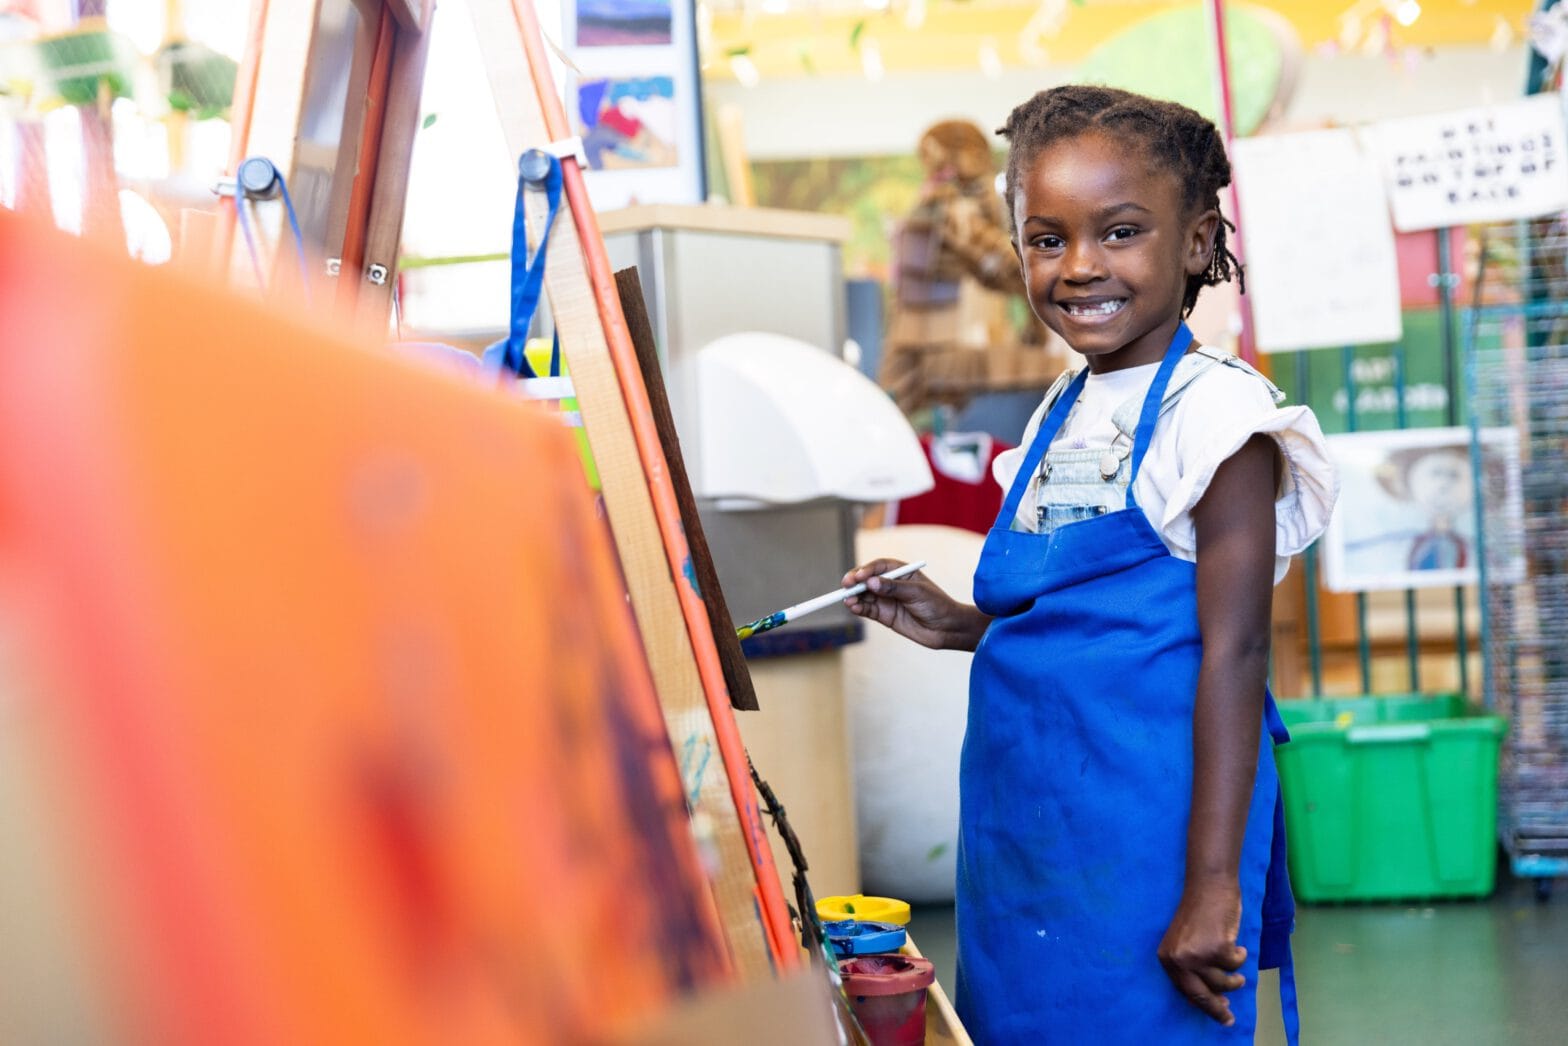 Image of a girl painting in the Knock Knock Children's Museum